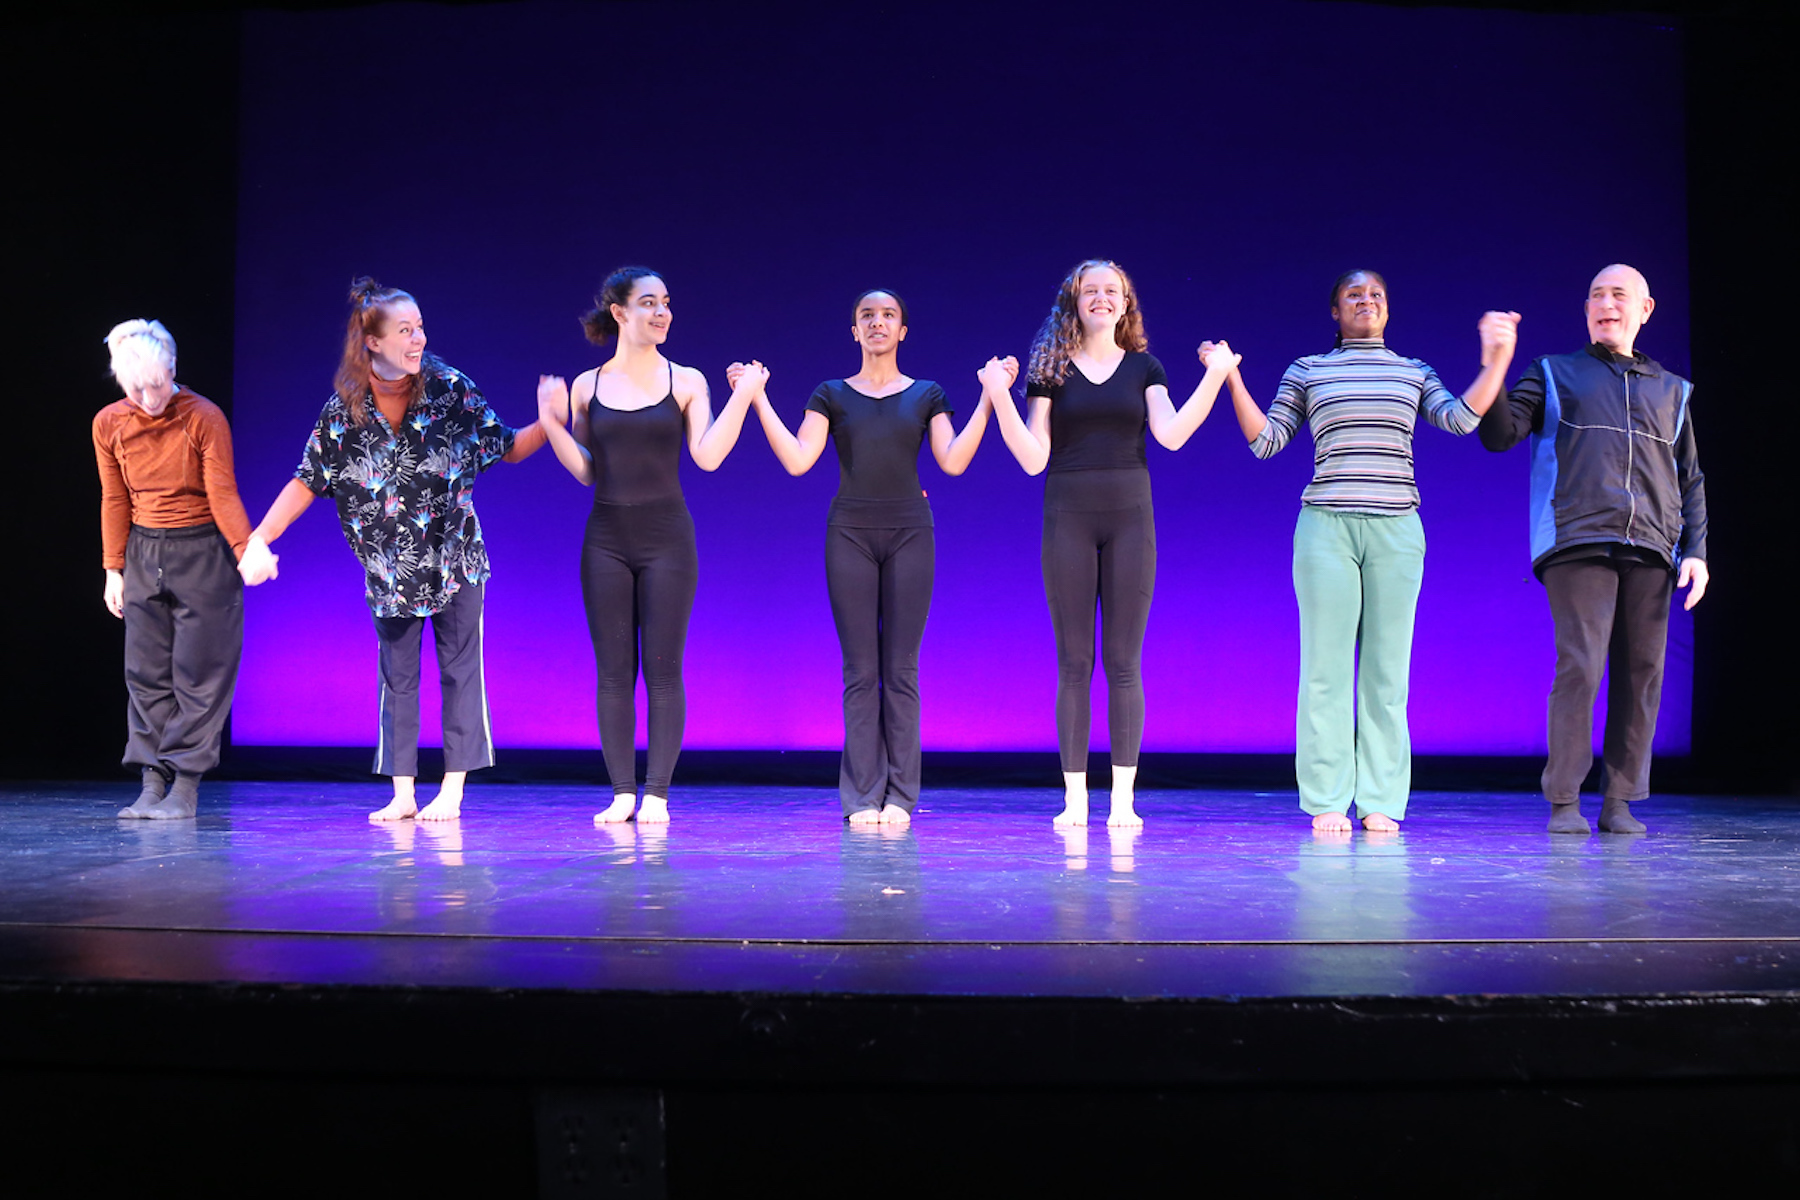 Dancers hold hands in a line and prepare to take a bow on stage.